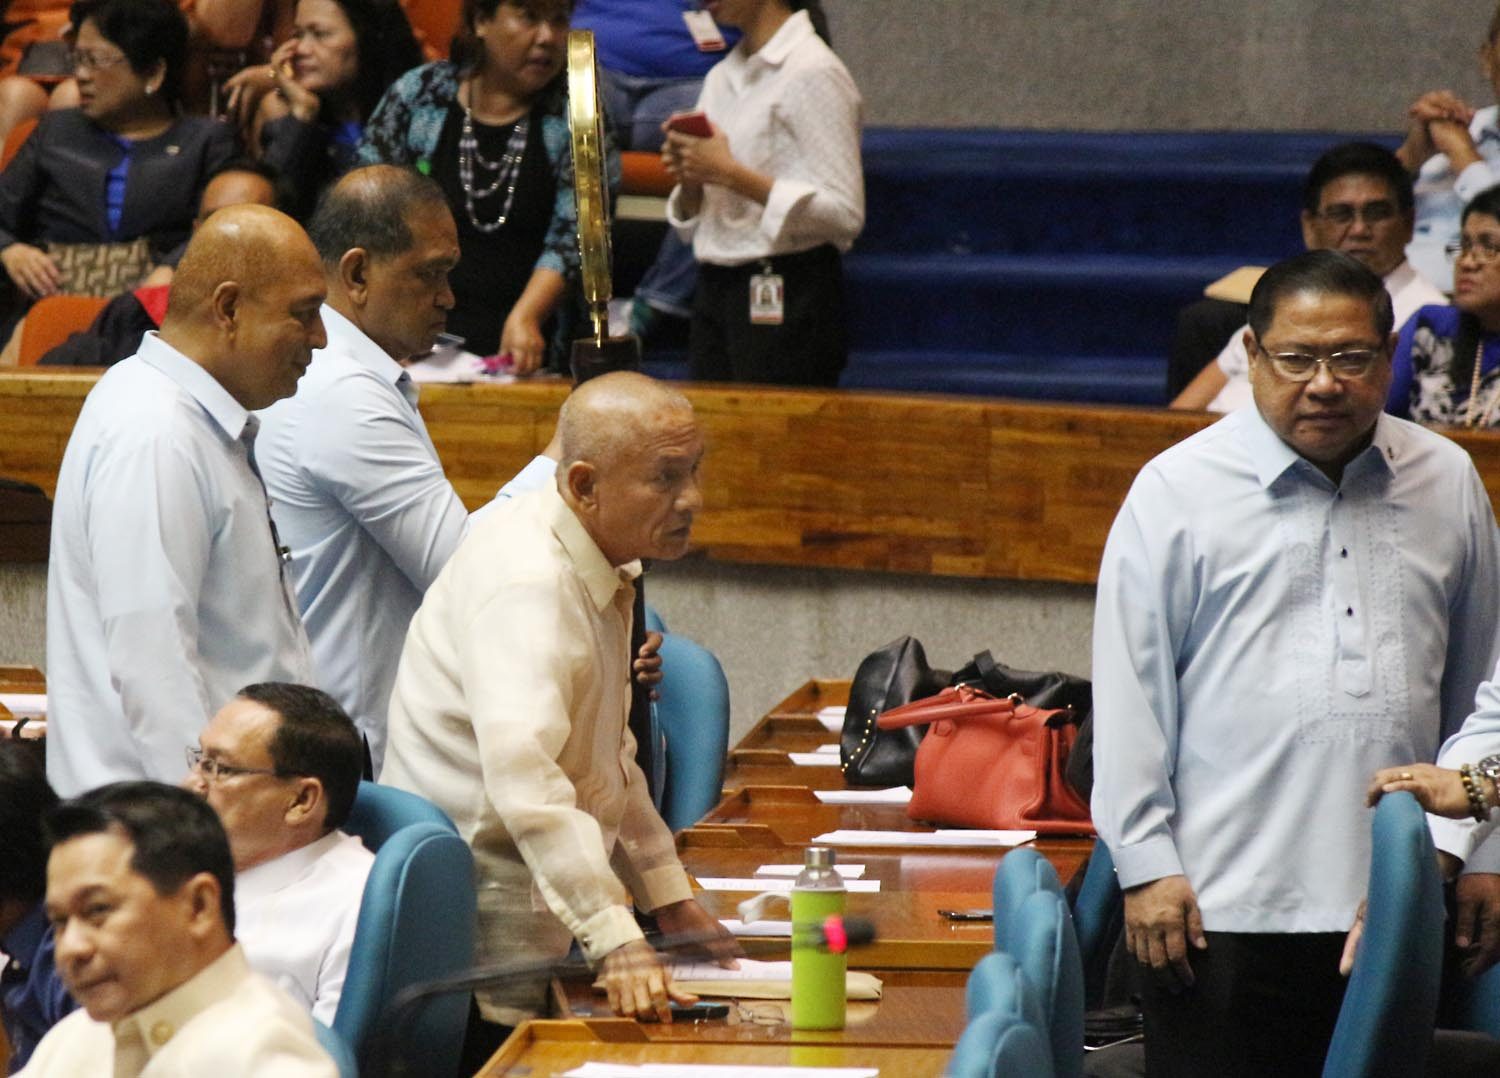 Northern Samar’s Abayon escorted out of Congress